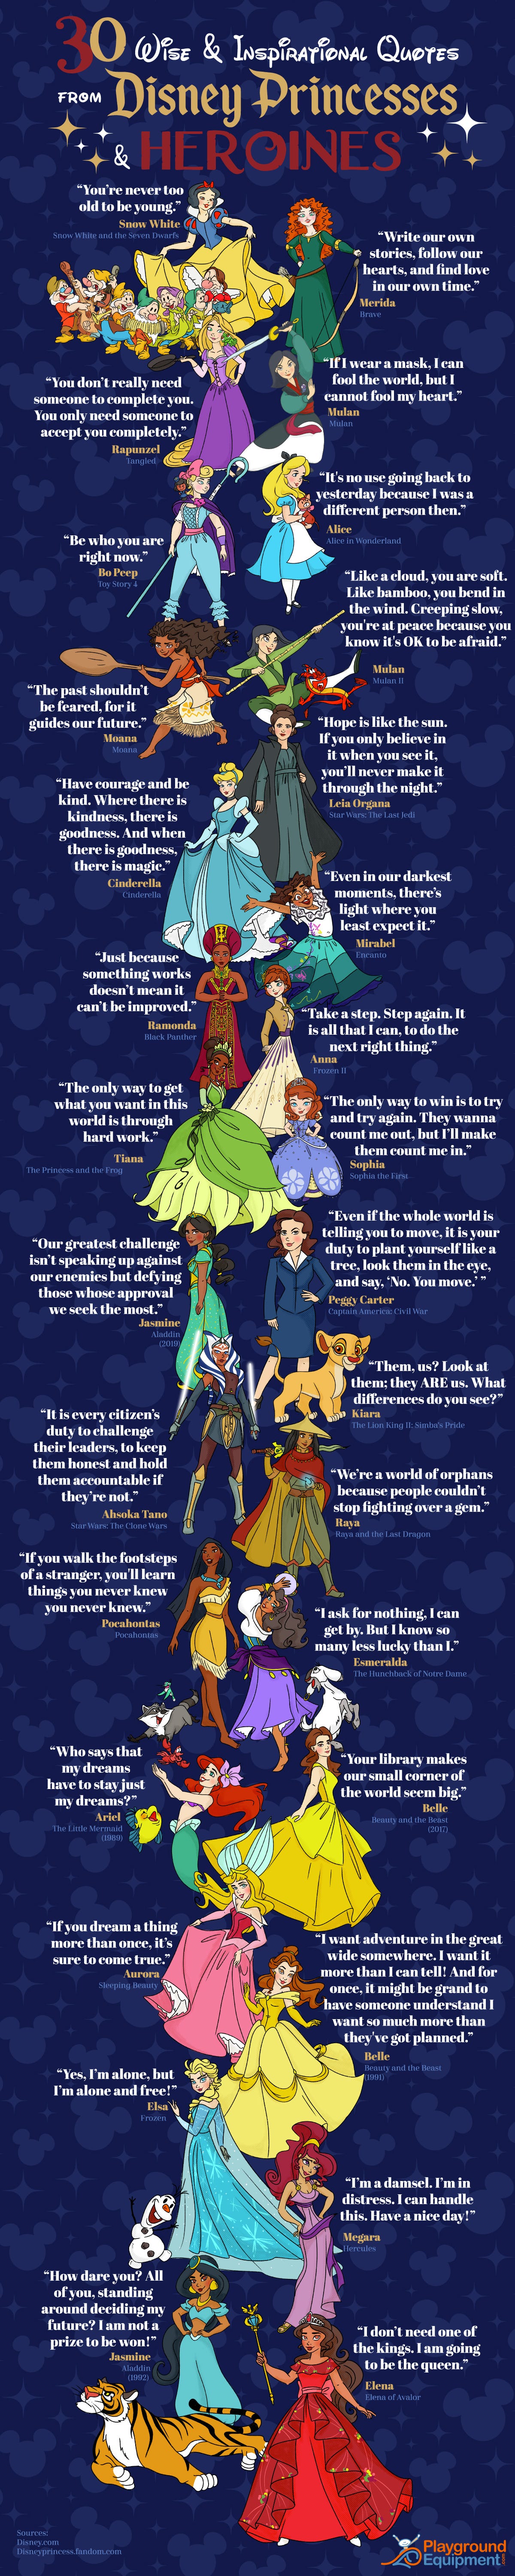 30 Wise & Inspirational Quotes from Disney Princesses and Heroines | by Tim  Hellwig | Medium